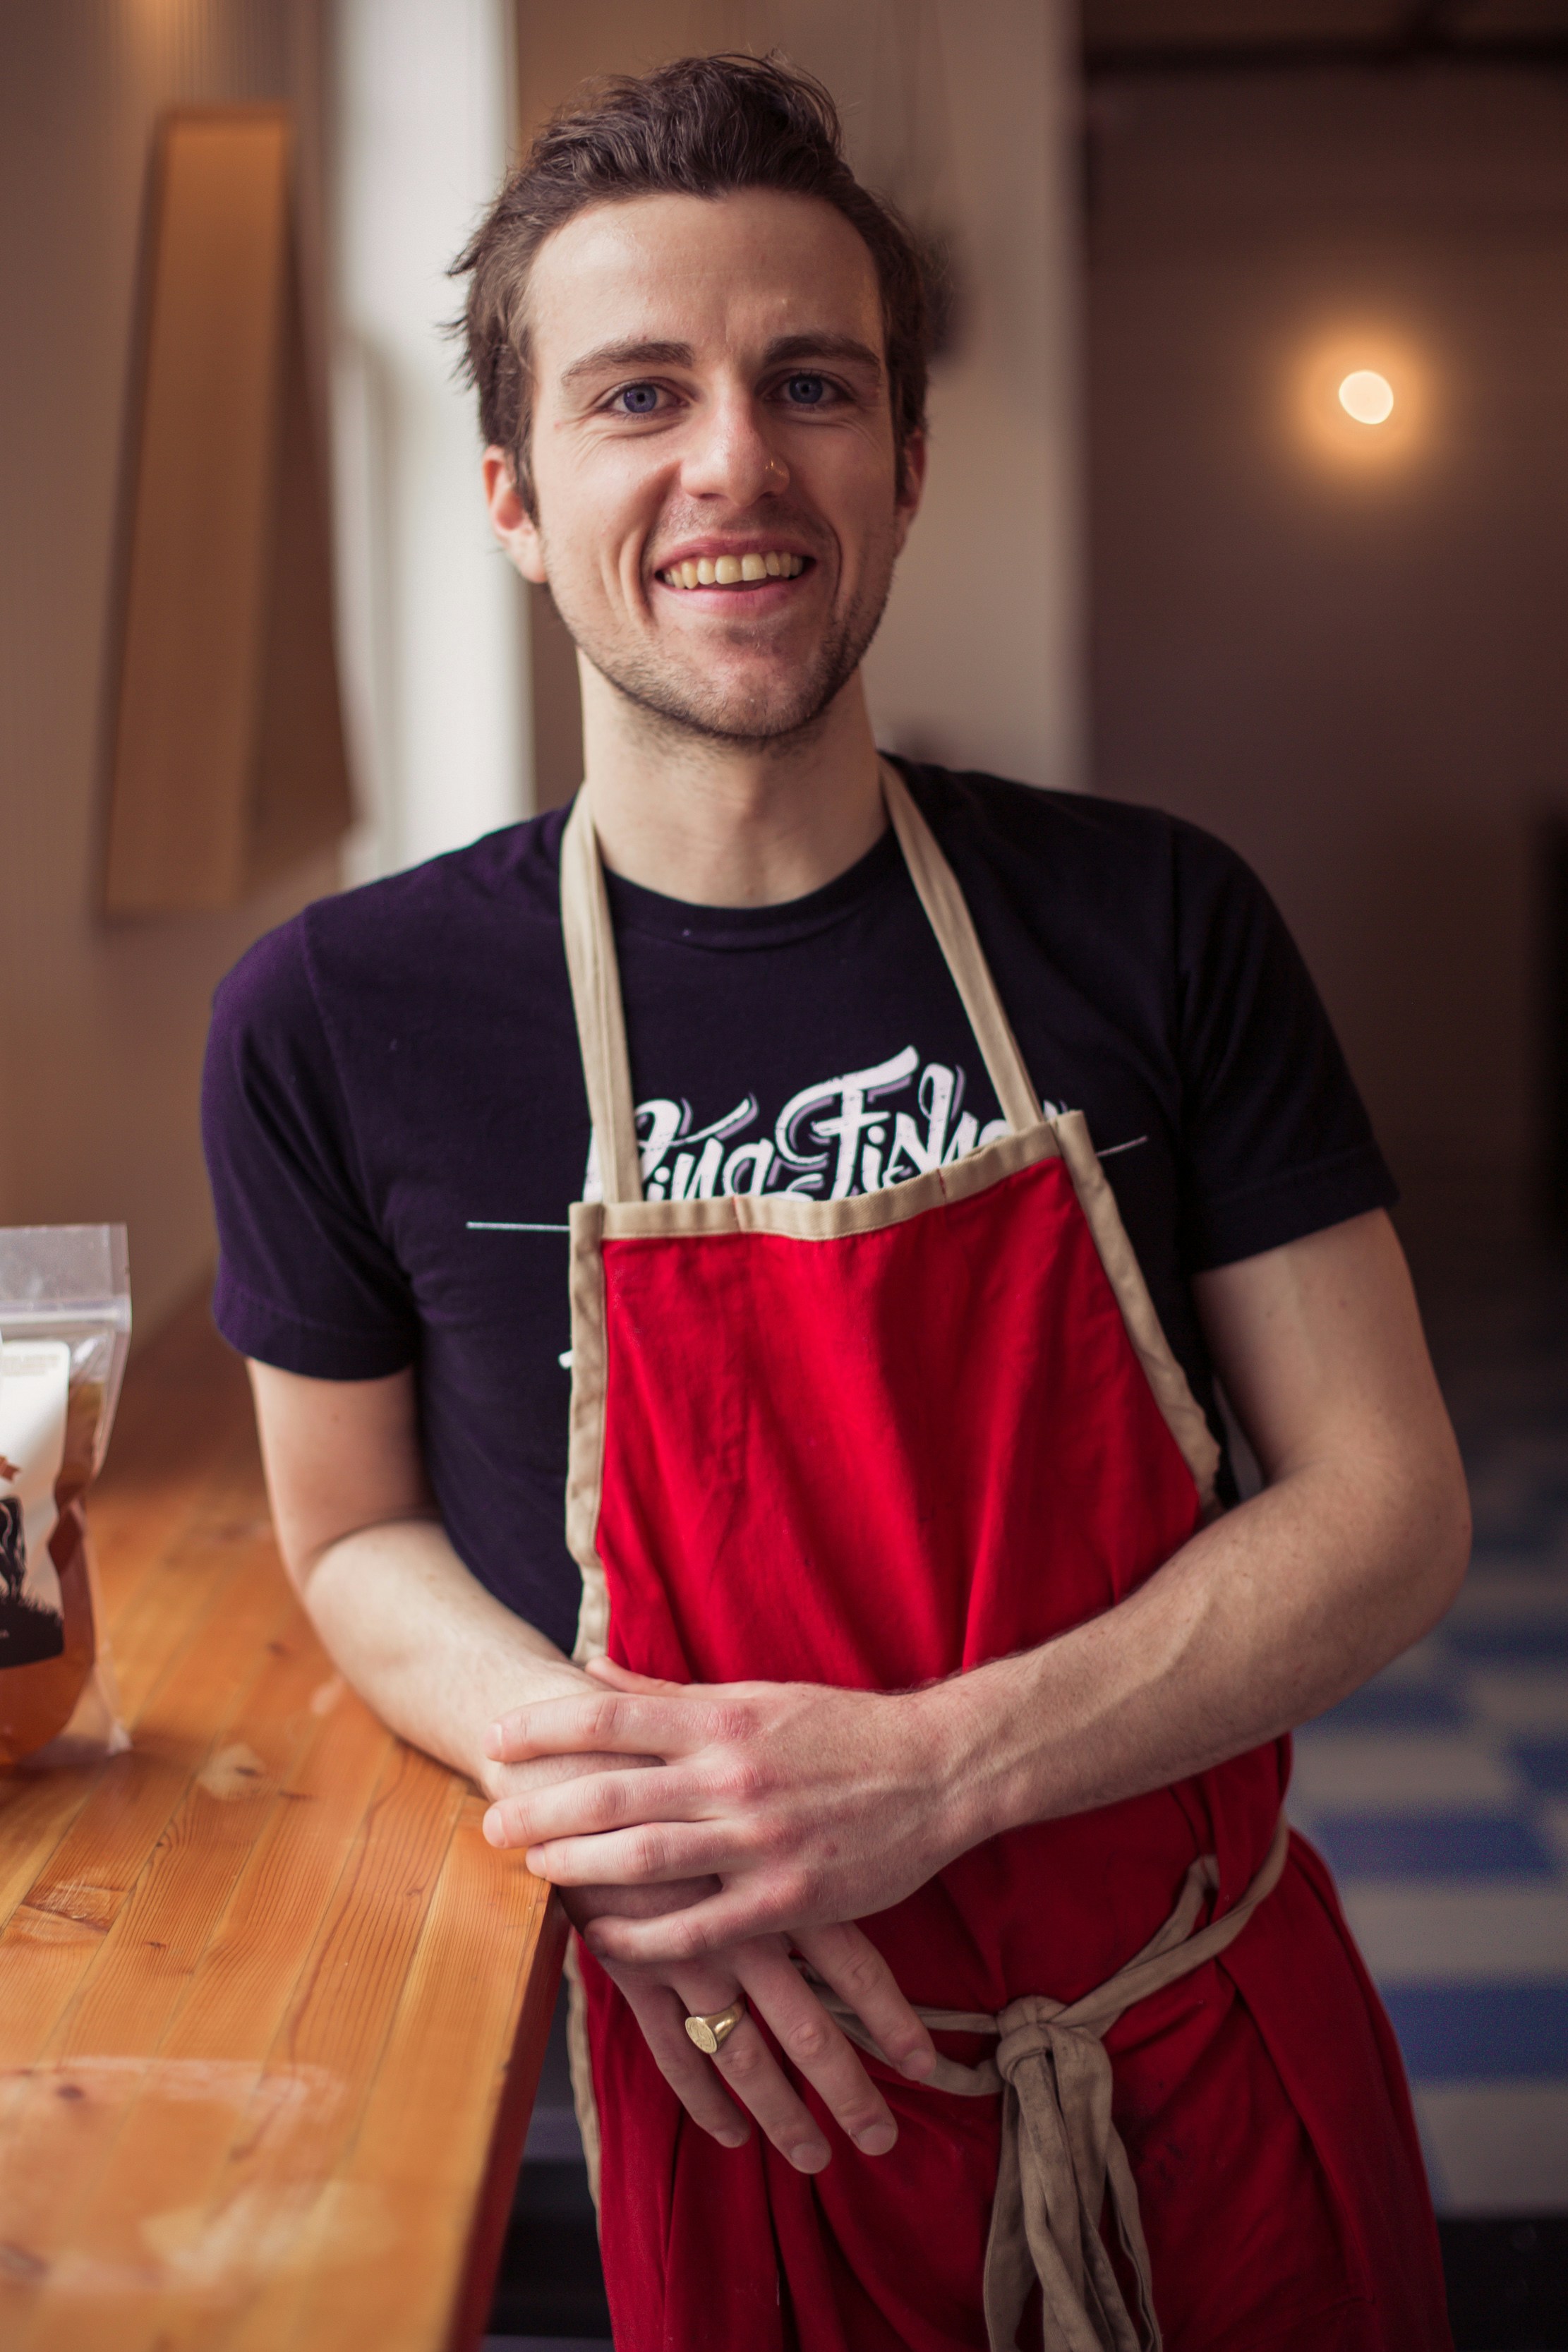 great photo recipe,how to photograph chef in red apron ; man in black crew neck t-shirt smiling